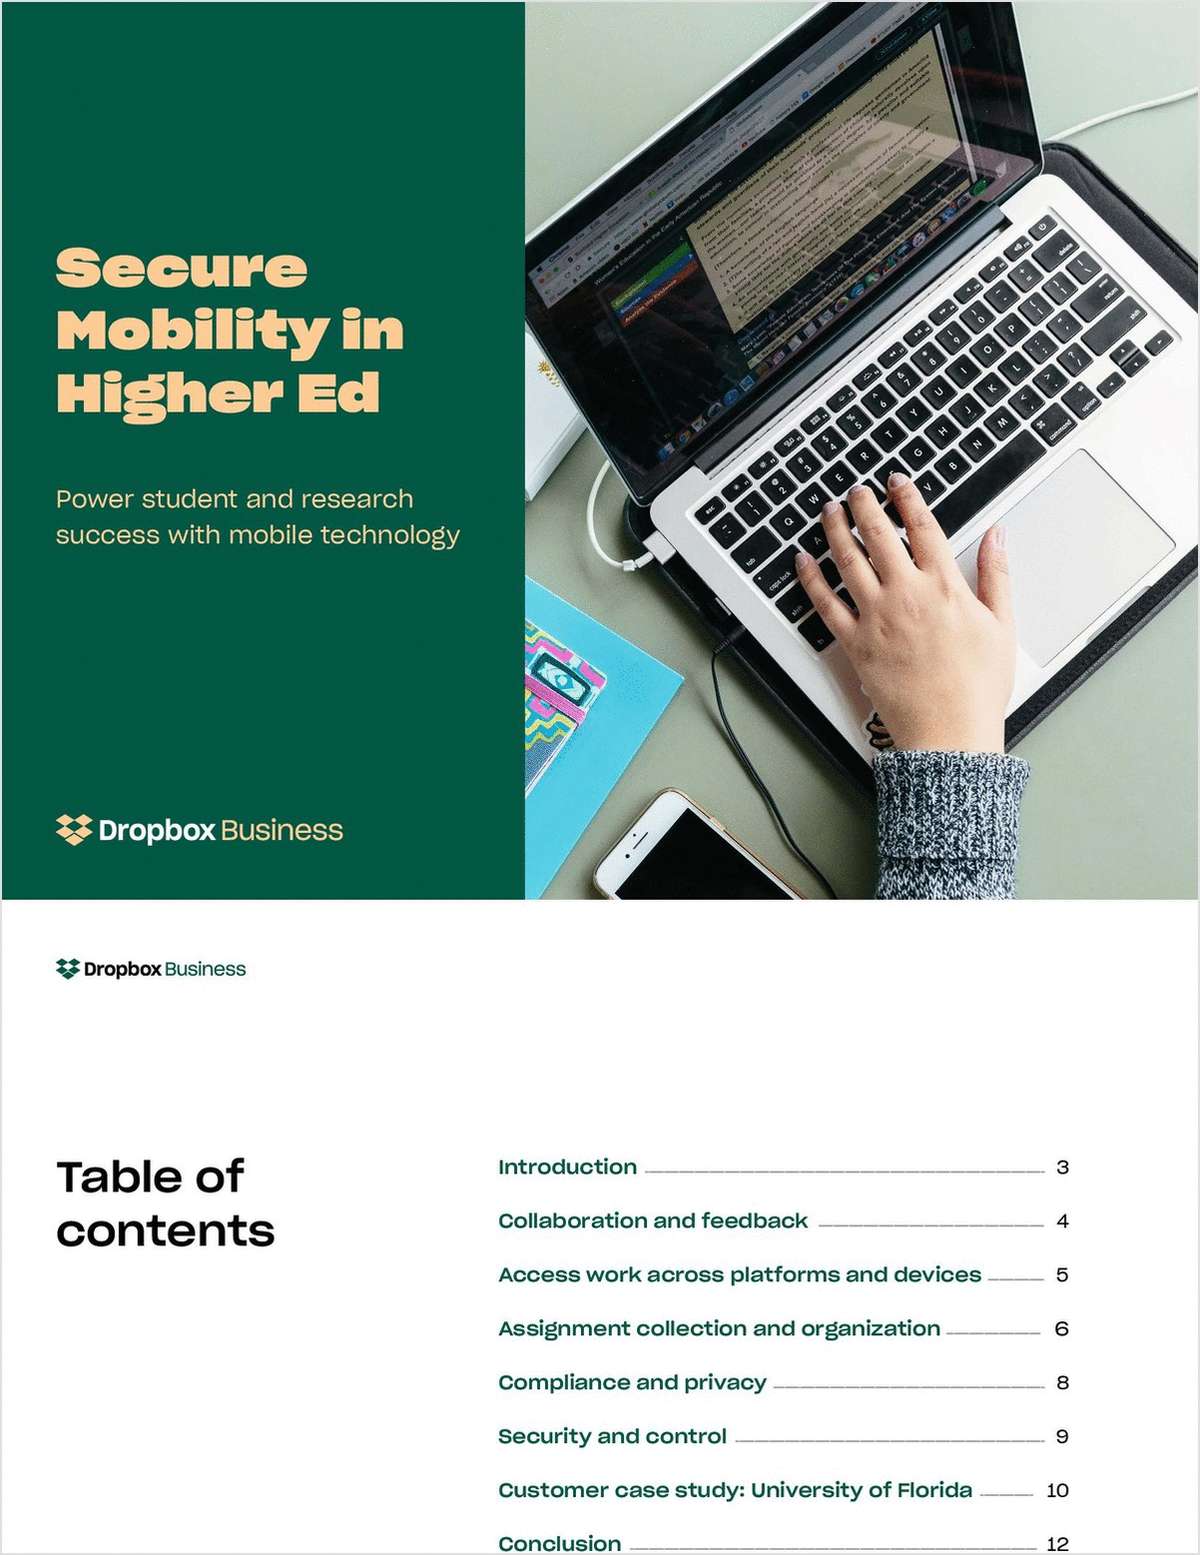 Secure Mobility in Higher Ed